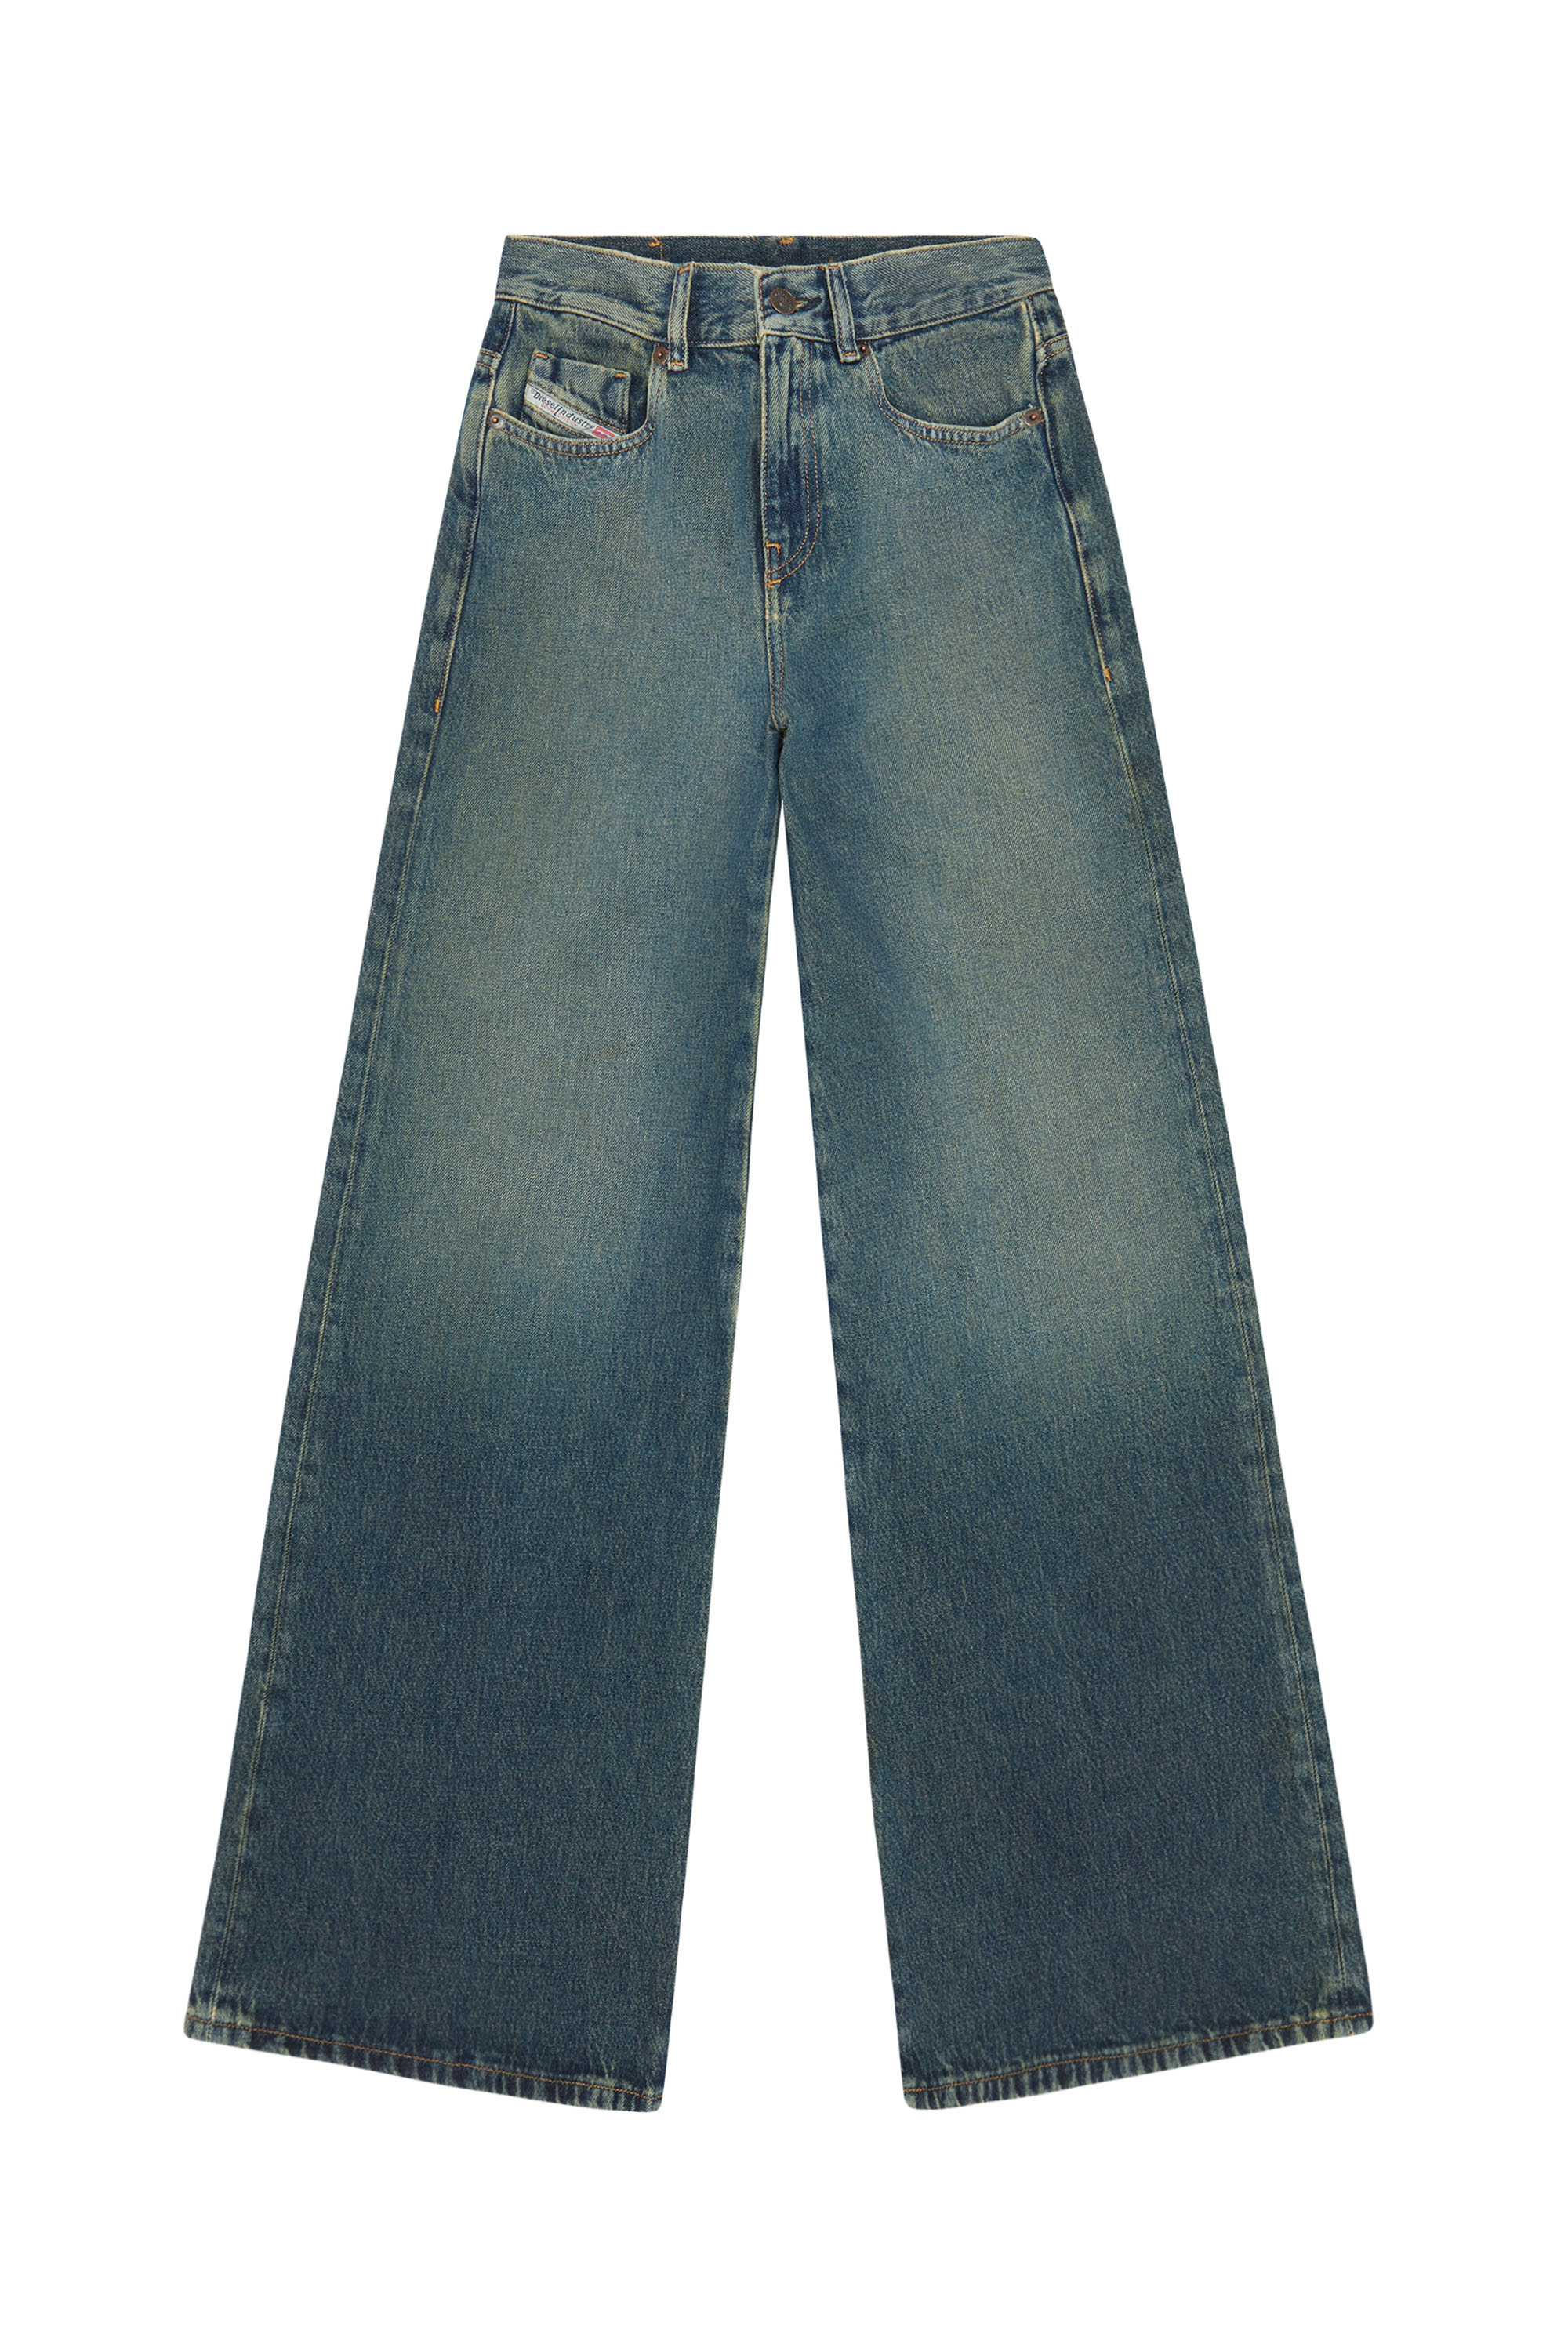 1978 09C04 Bootcut and Flare Jeans, Azul Oscuro - Vaqueros